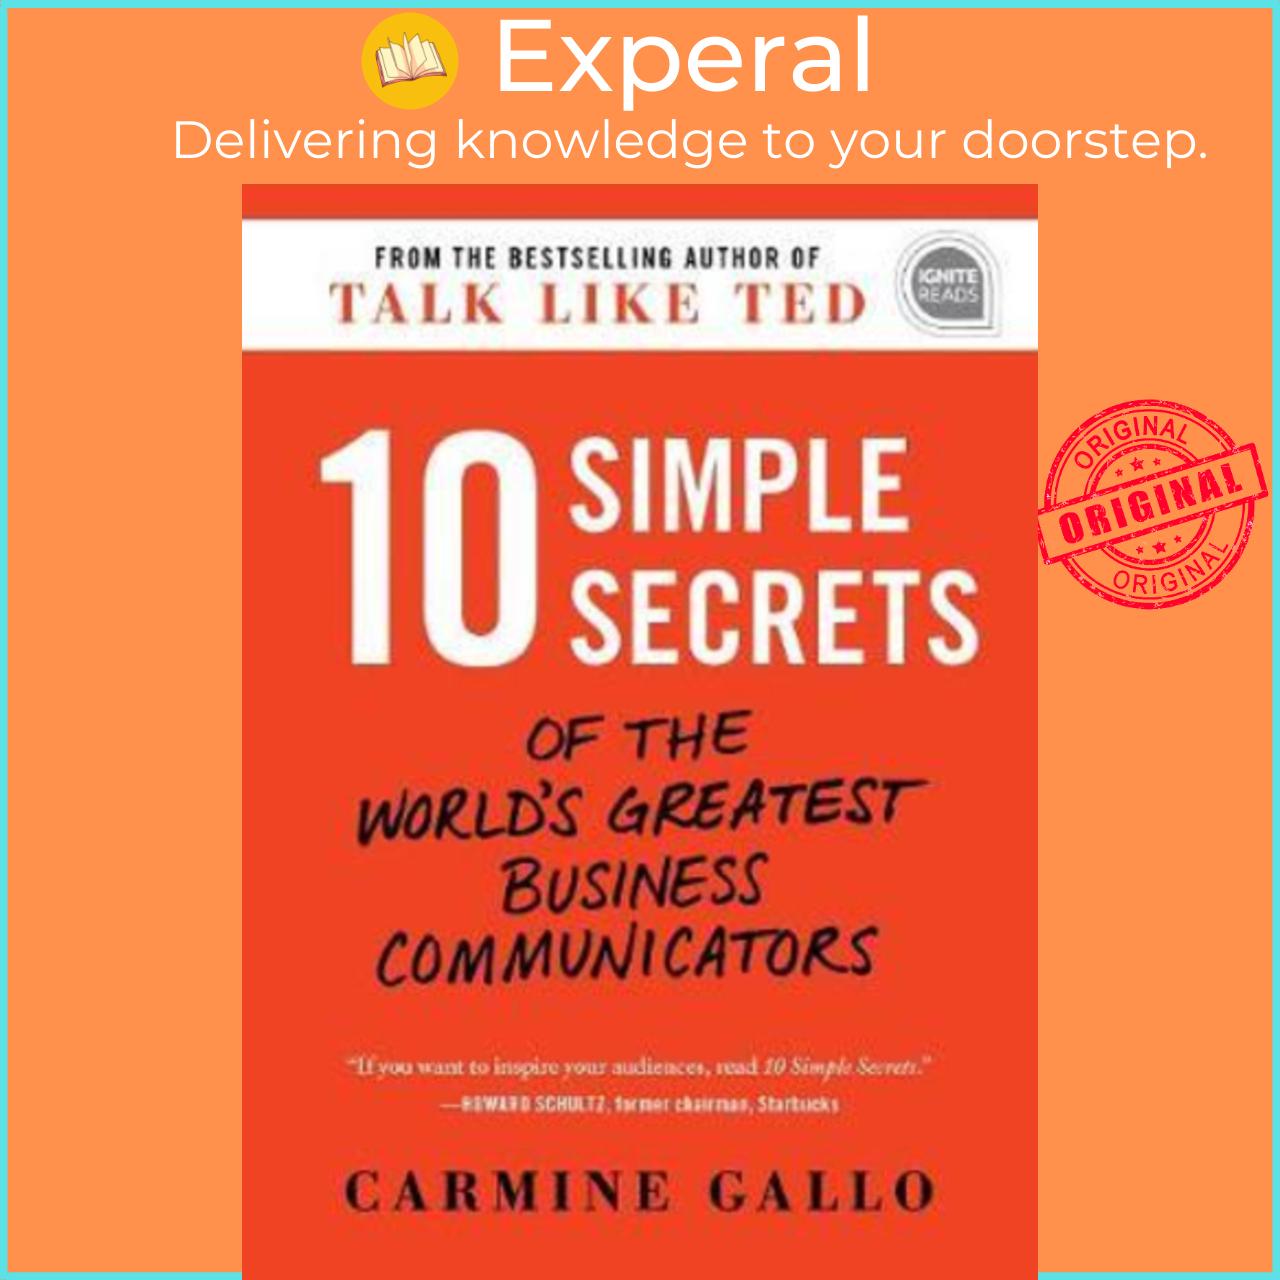 Sách - 10 Simple Secrets of the World's Greatest Business Communicators by Carmine Gallo (US edition, hardcover)